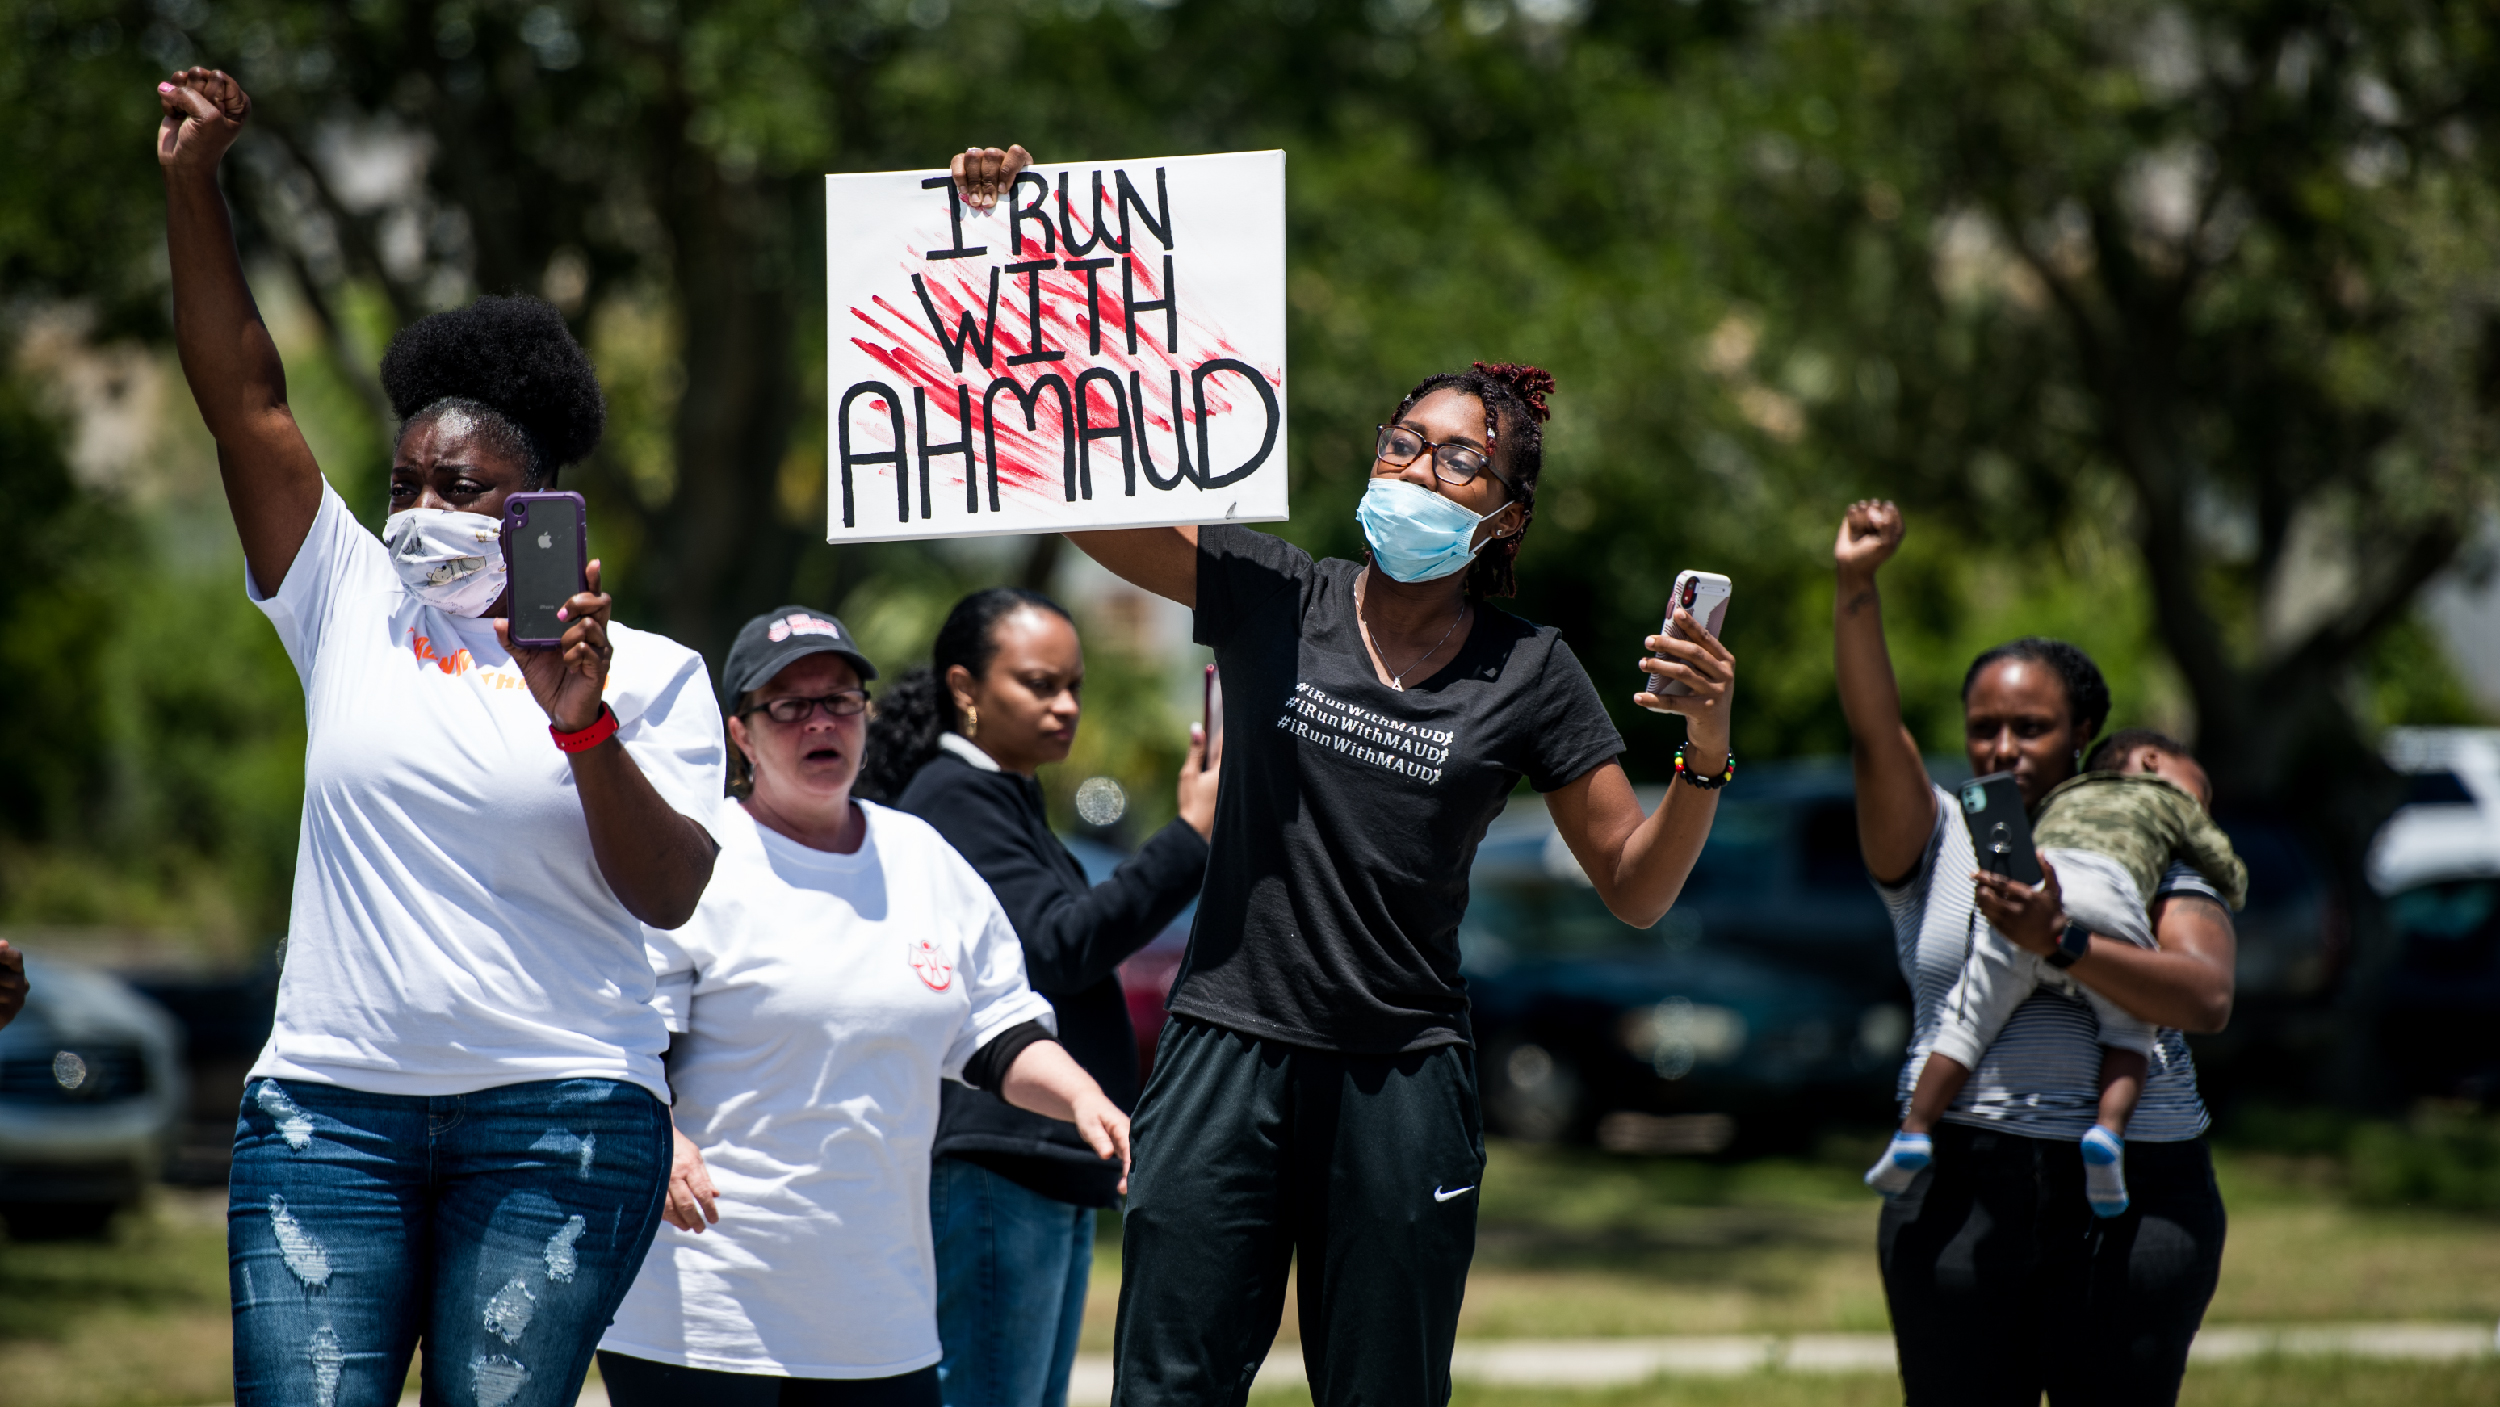 BRUNSWICK, GA - MAY 09: Demonstrators raise their fists at a parade of passing motorcyclists riding in honor of Ahmaud Arbery at Sidney Lanier Park on May 9, 2020 in Brunswick, Georgia. Arbery was shot and killed while jogging in the nearby Satilla Shores neighborhood on February 23. (Photo by Sean Rayford/Getty Images)